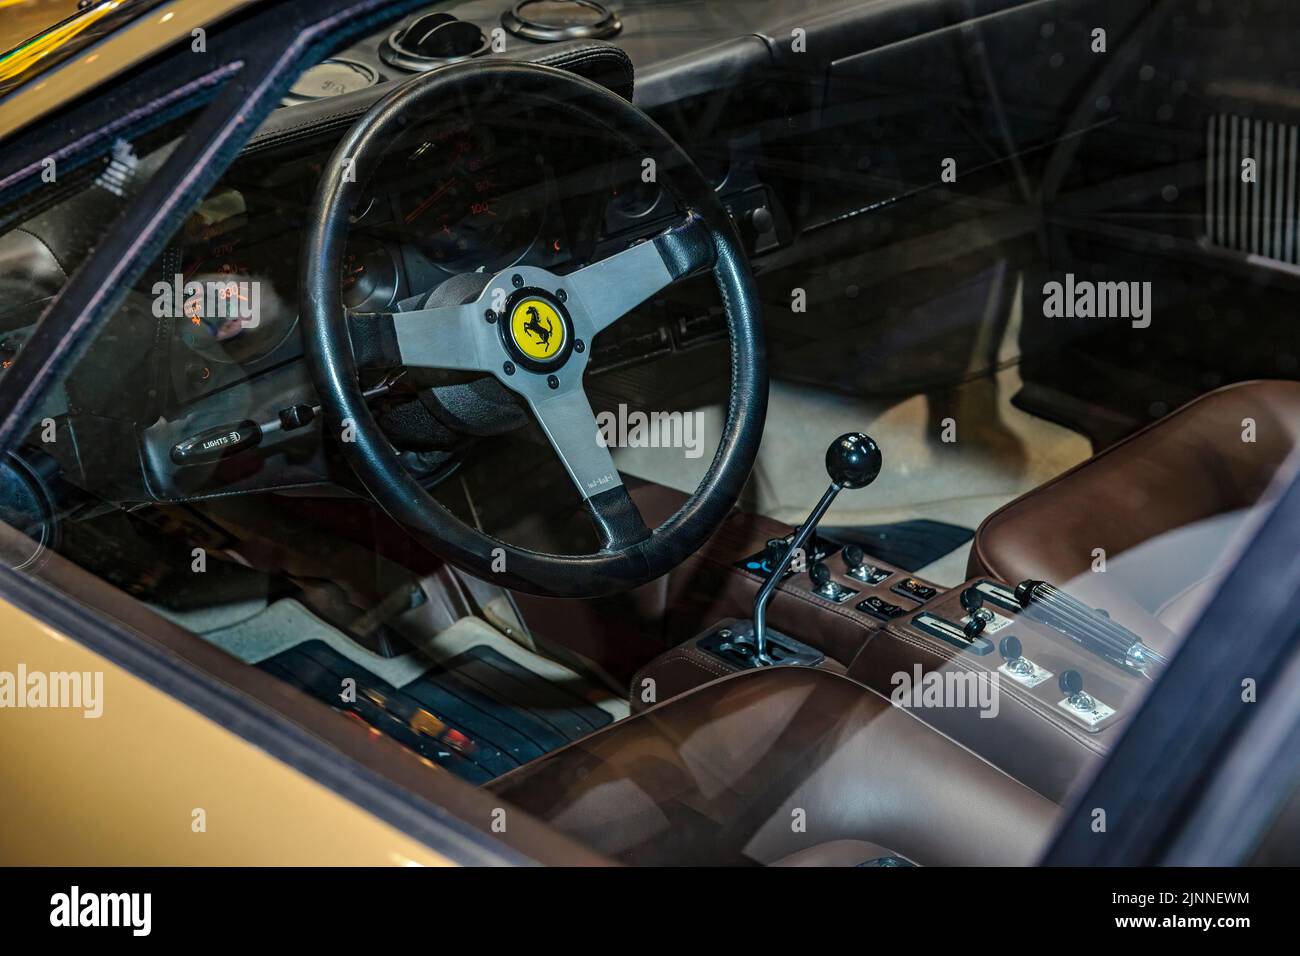 View into interior of Ferrari 512 BB from 70s 1977 with steering wheel with logo jumping horse Cavallino Rampante and lever of manual gear shift Stock Photo